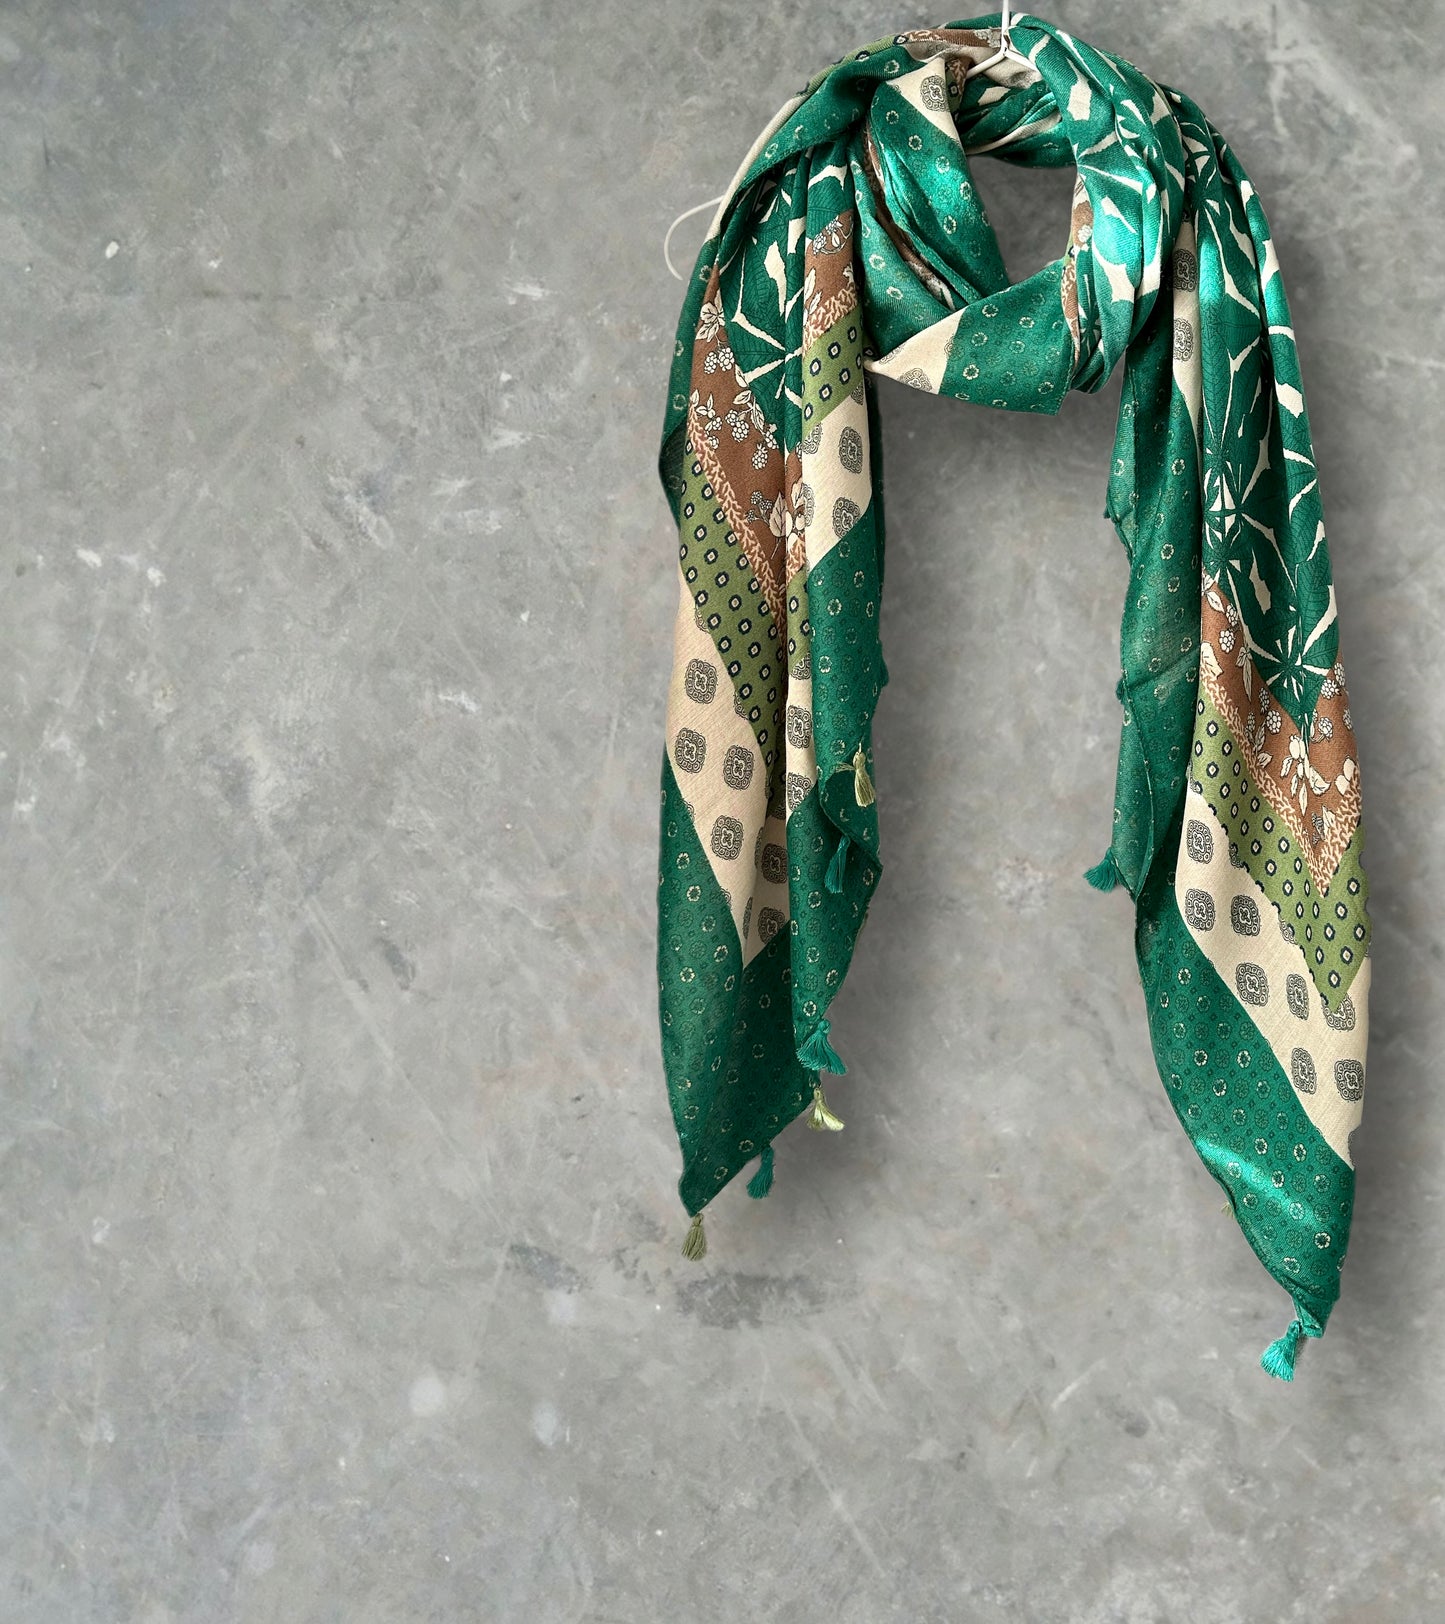 Green Cotton Scarf with Bohemian Flowers Pattern and Tassels.Perfect for Summer, Autumn and Gifts for Her Birthday,Christmas or Mother.